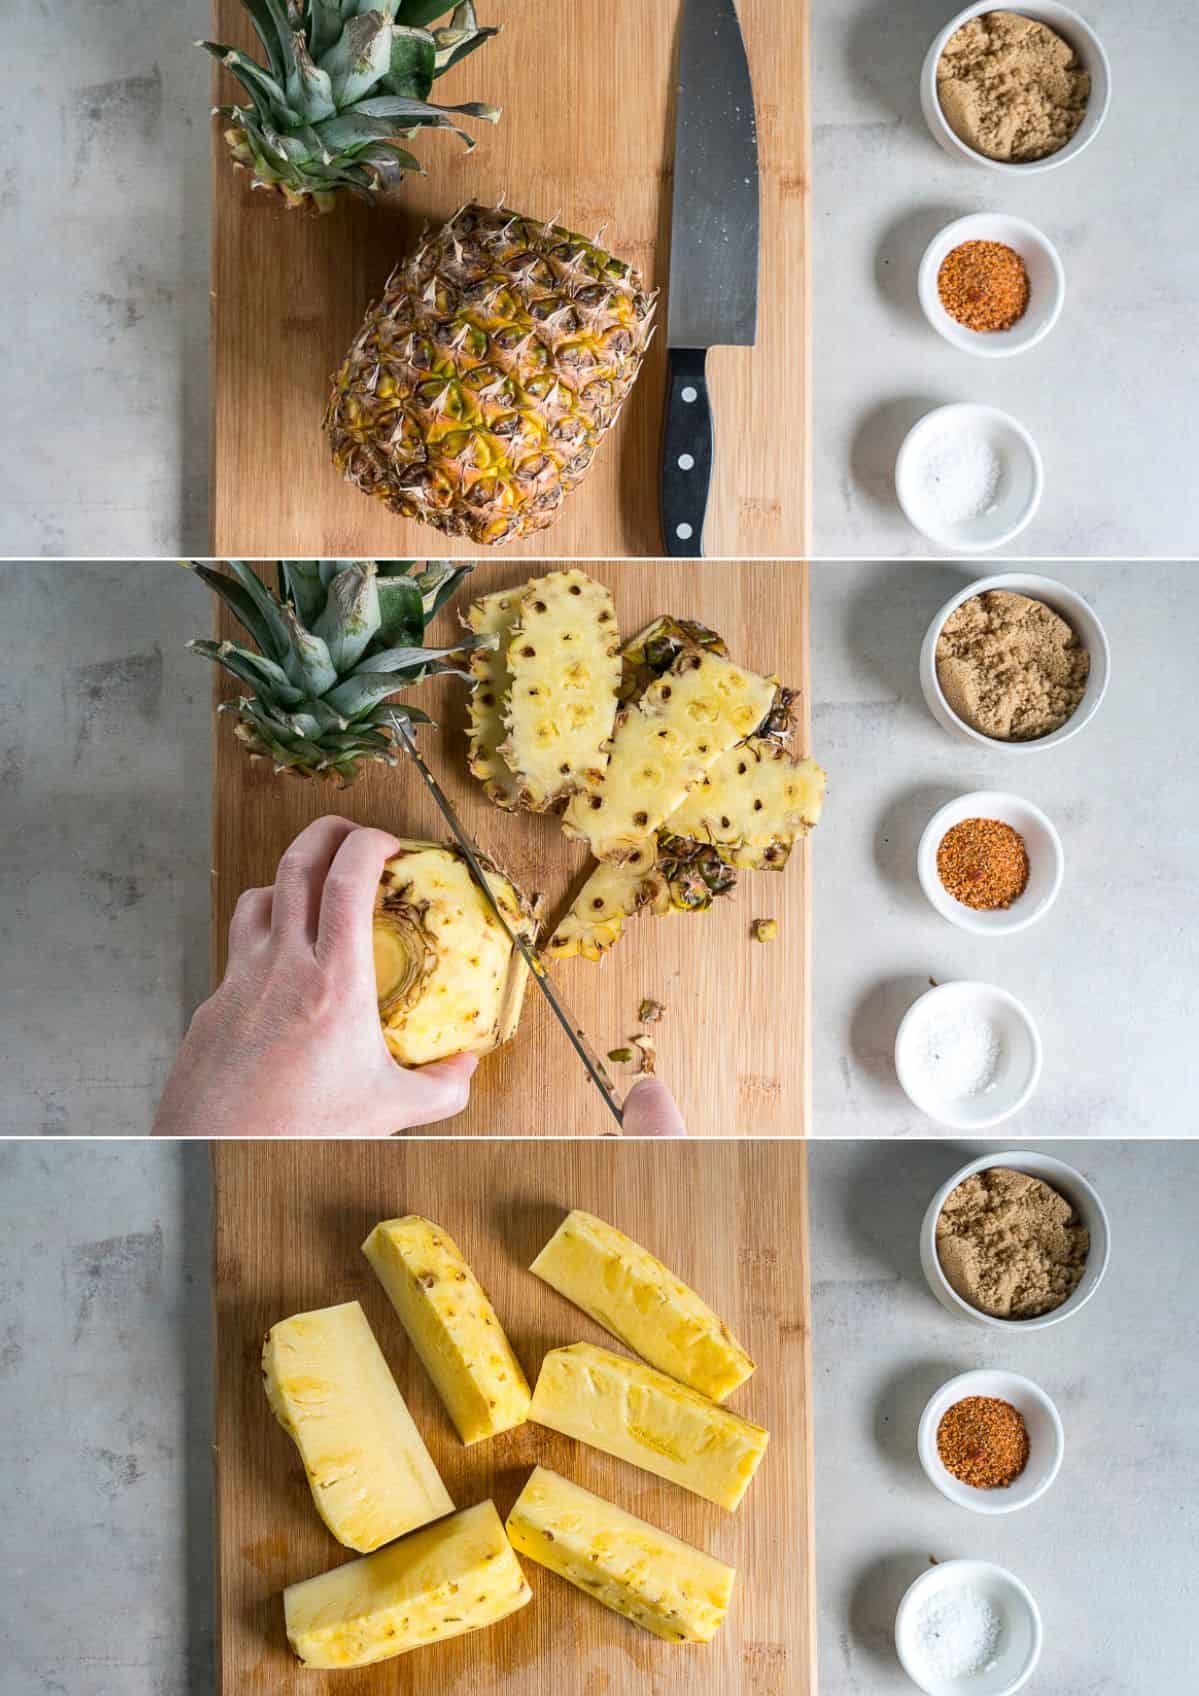 instructional photos for making smoked pineapple